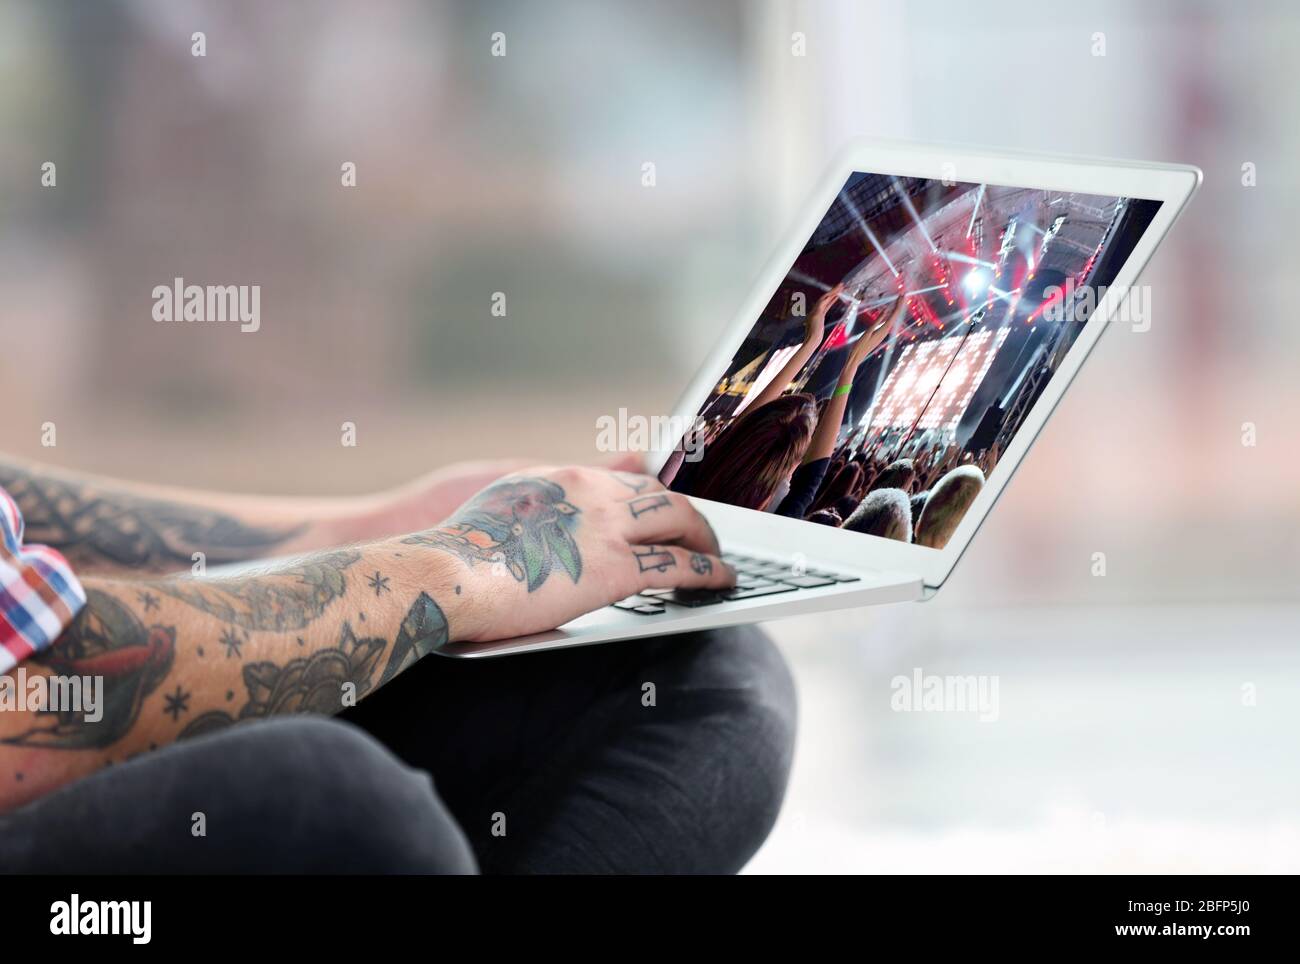 Young man with tattoo using laptop on a floor at home Stock Photo